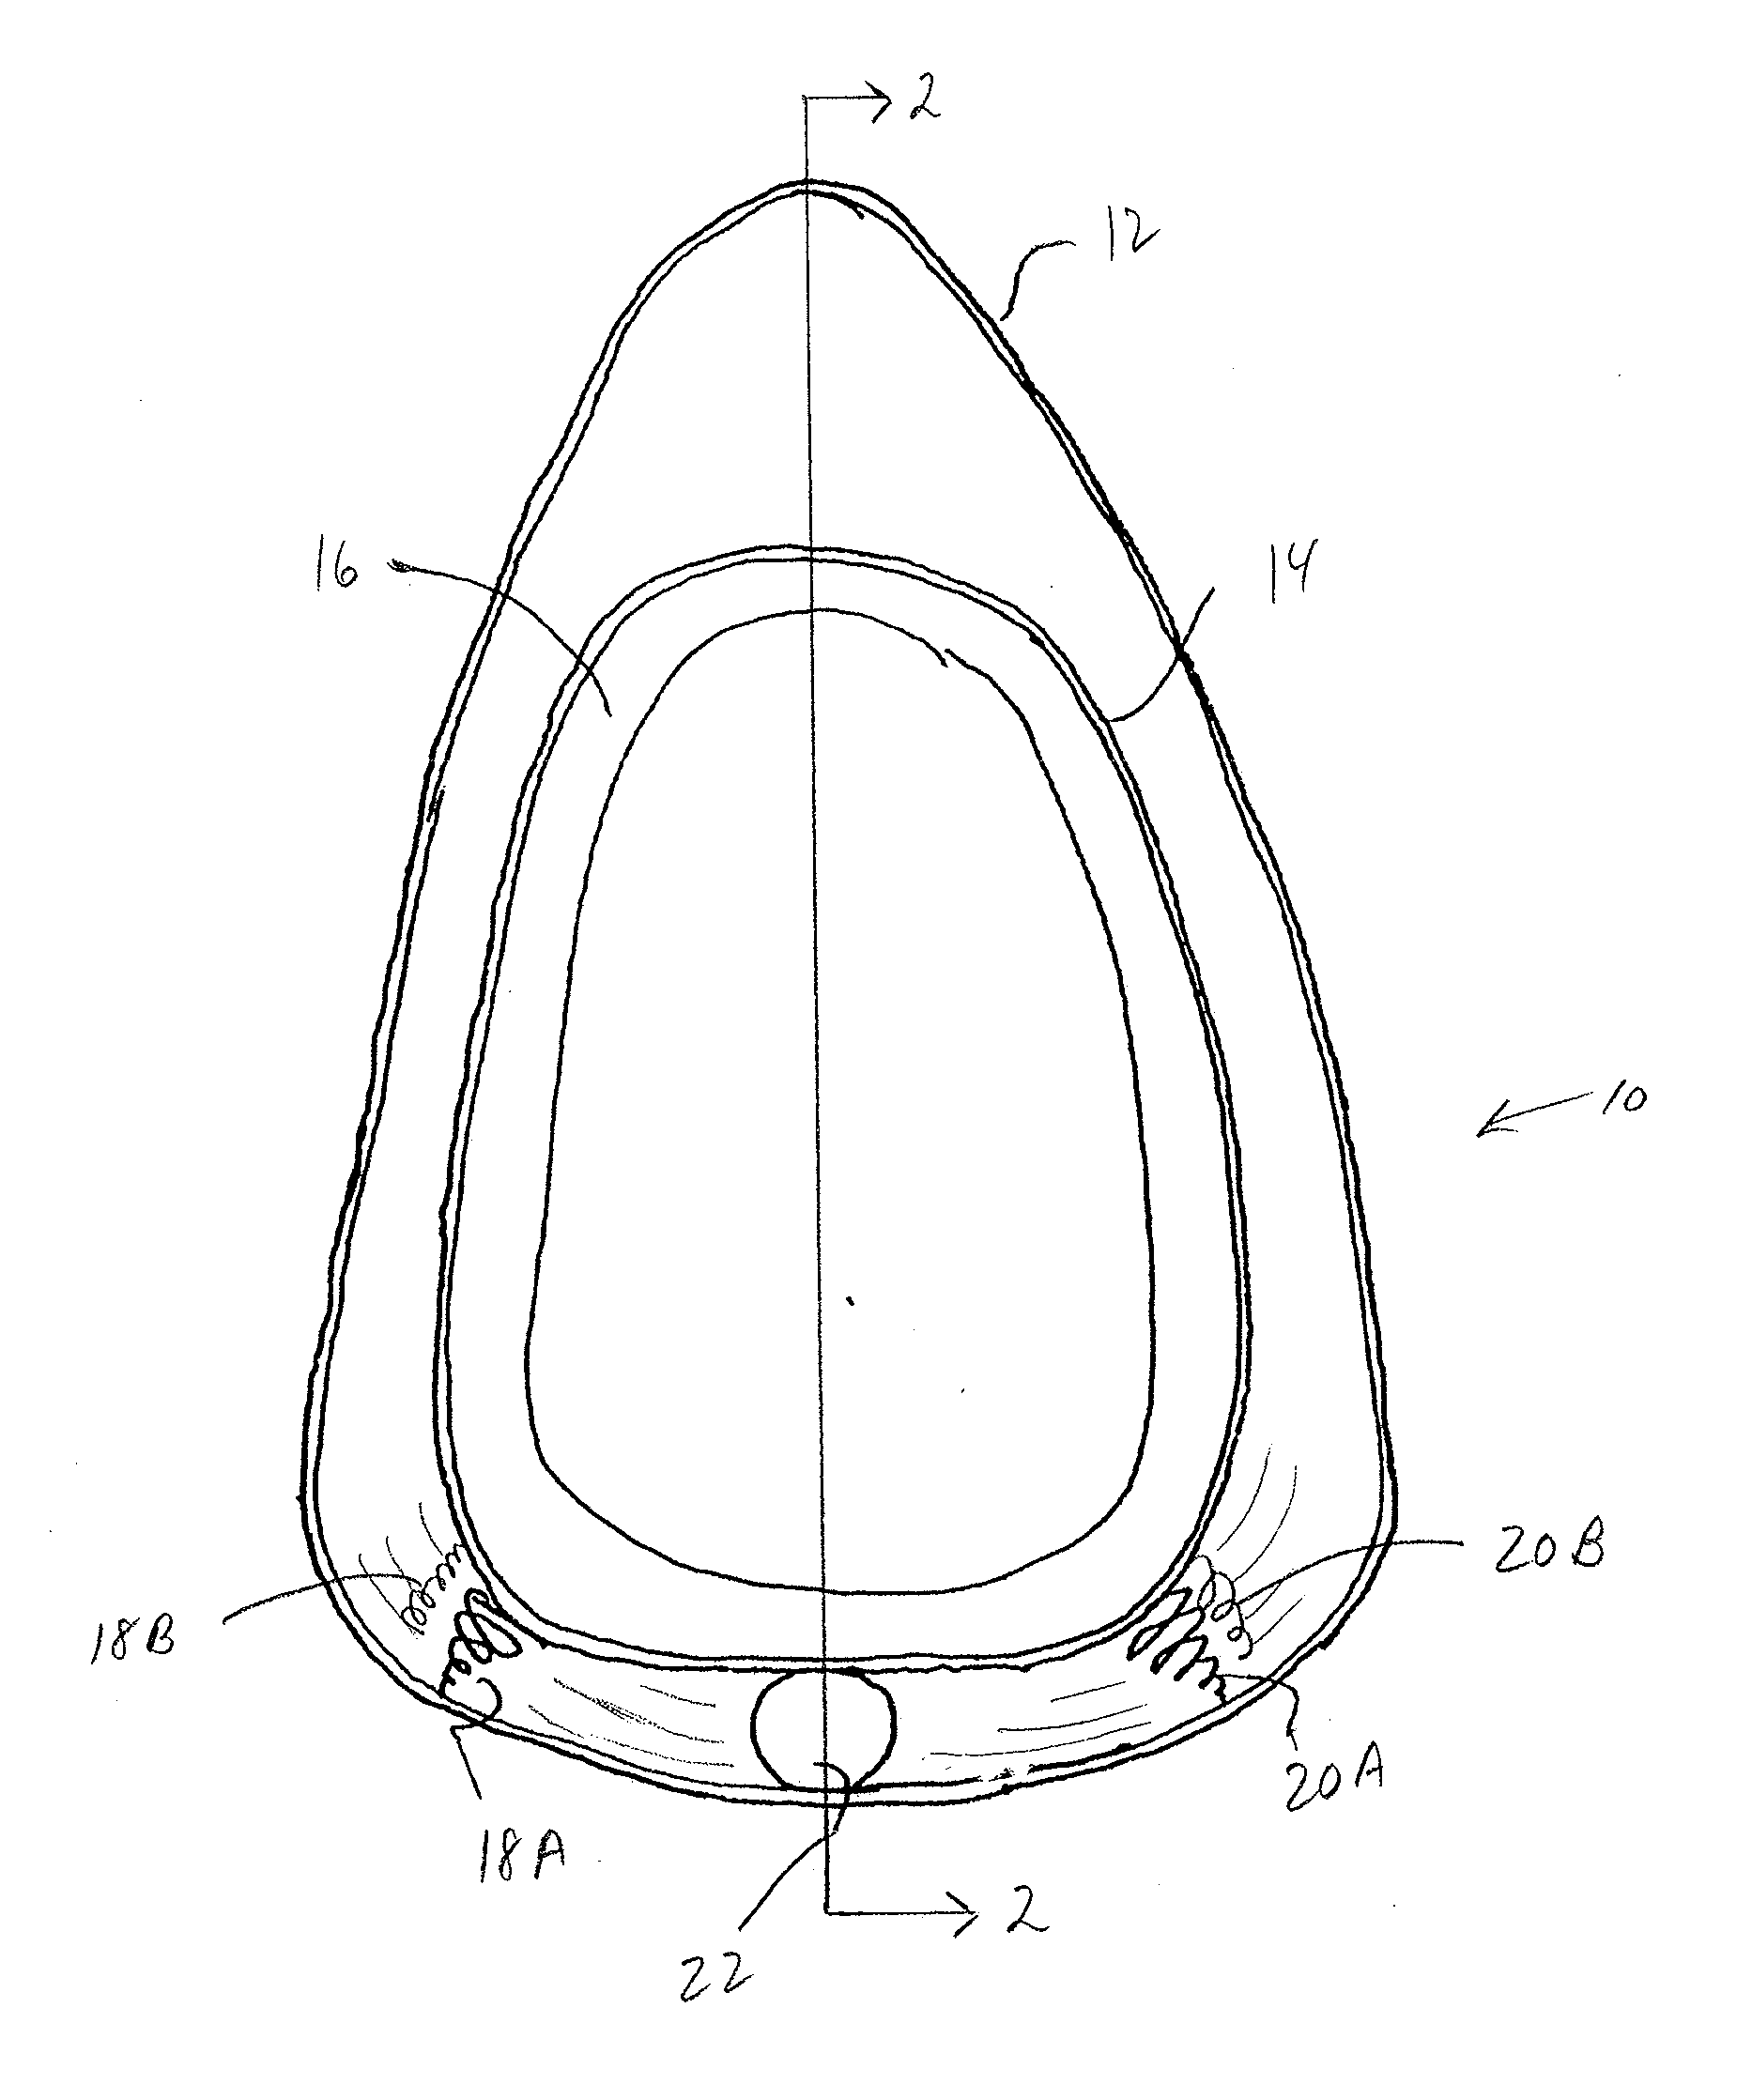 Energy Dissipation System For A Helmet